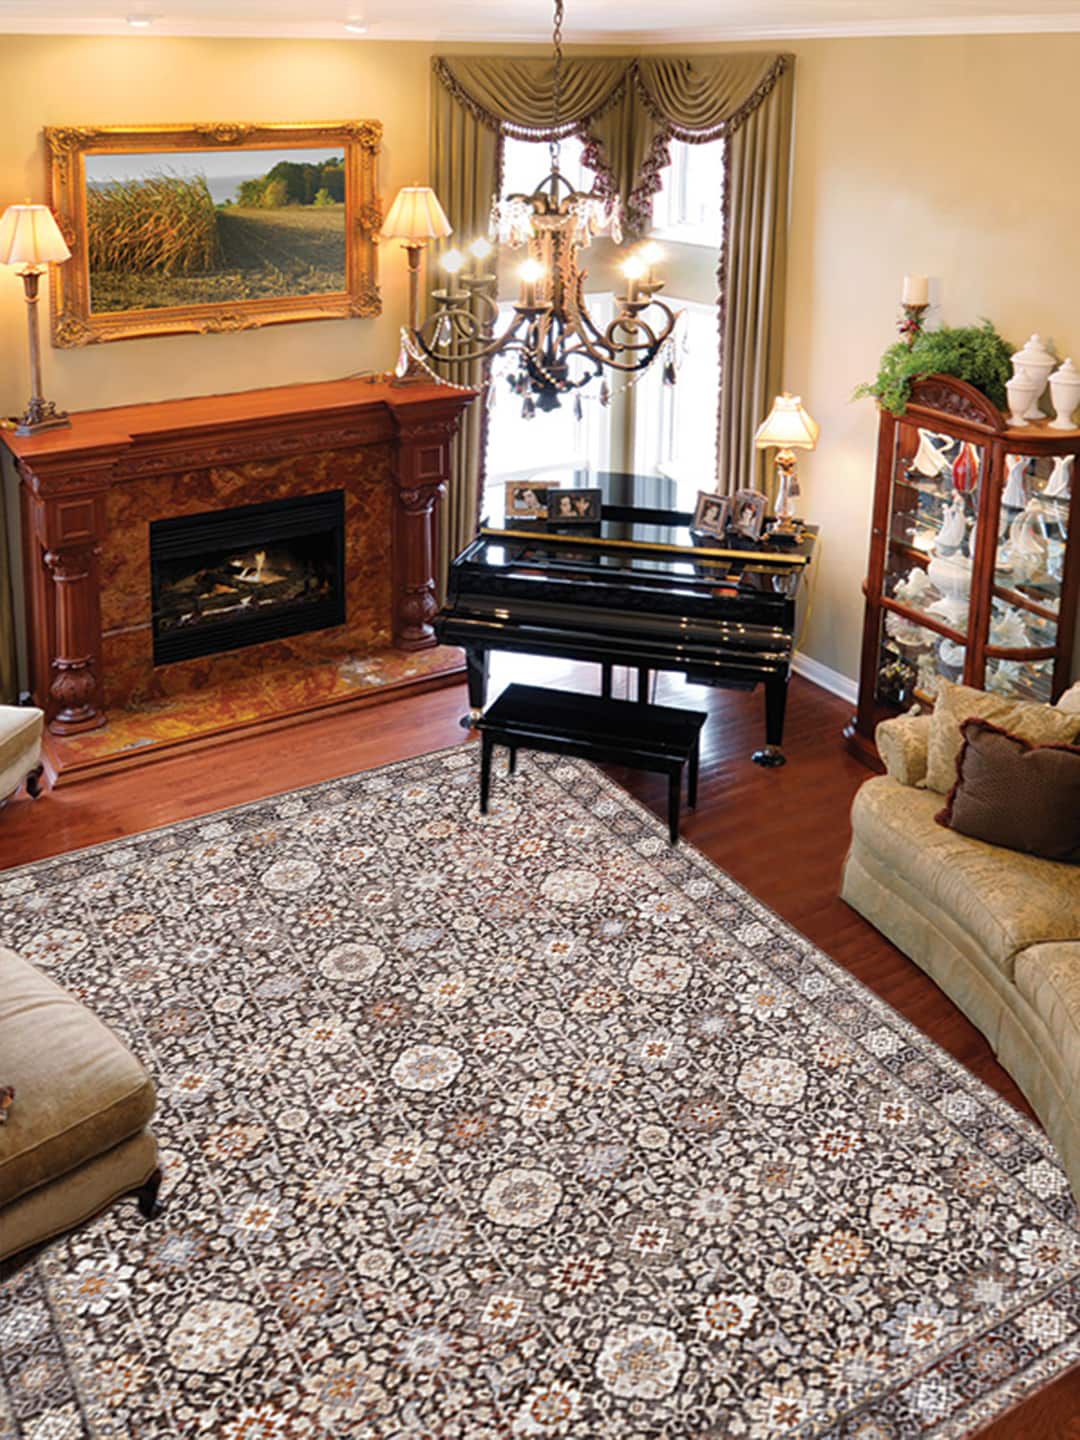 DDecor Brown & White Ethnic Motifs Traditional Carpet Price in India